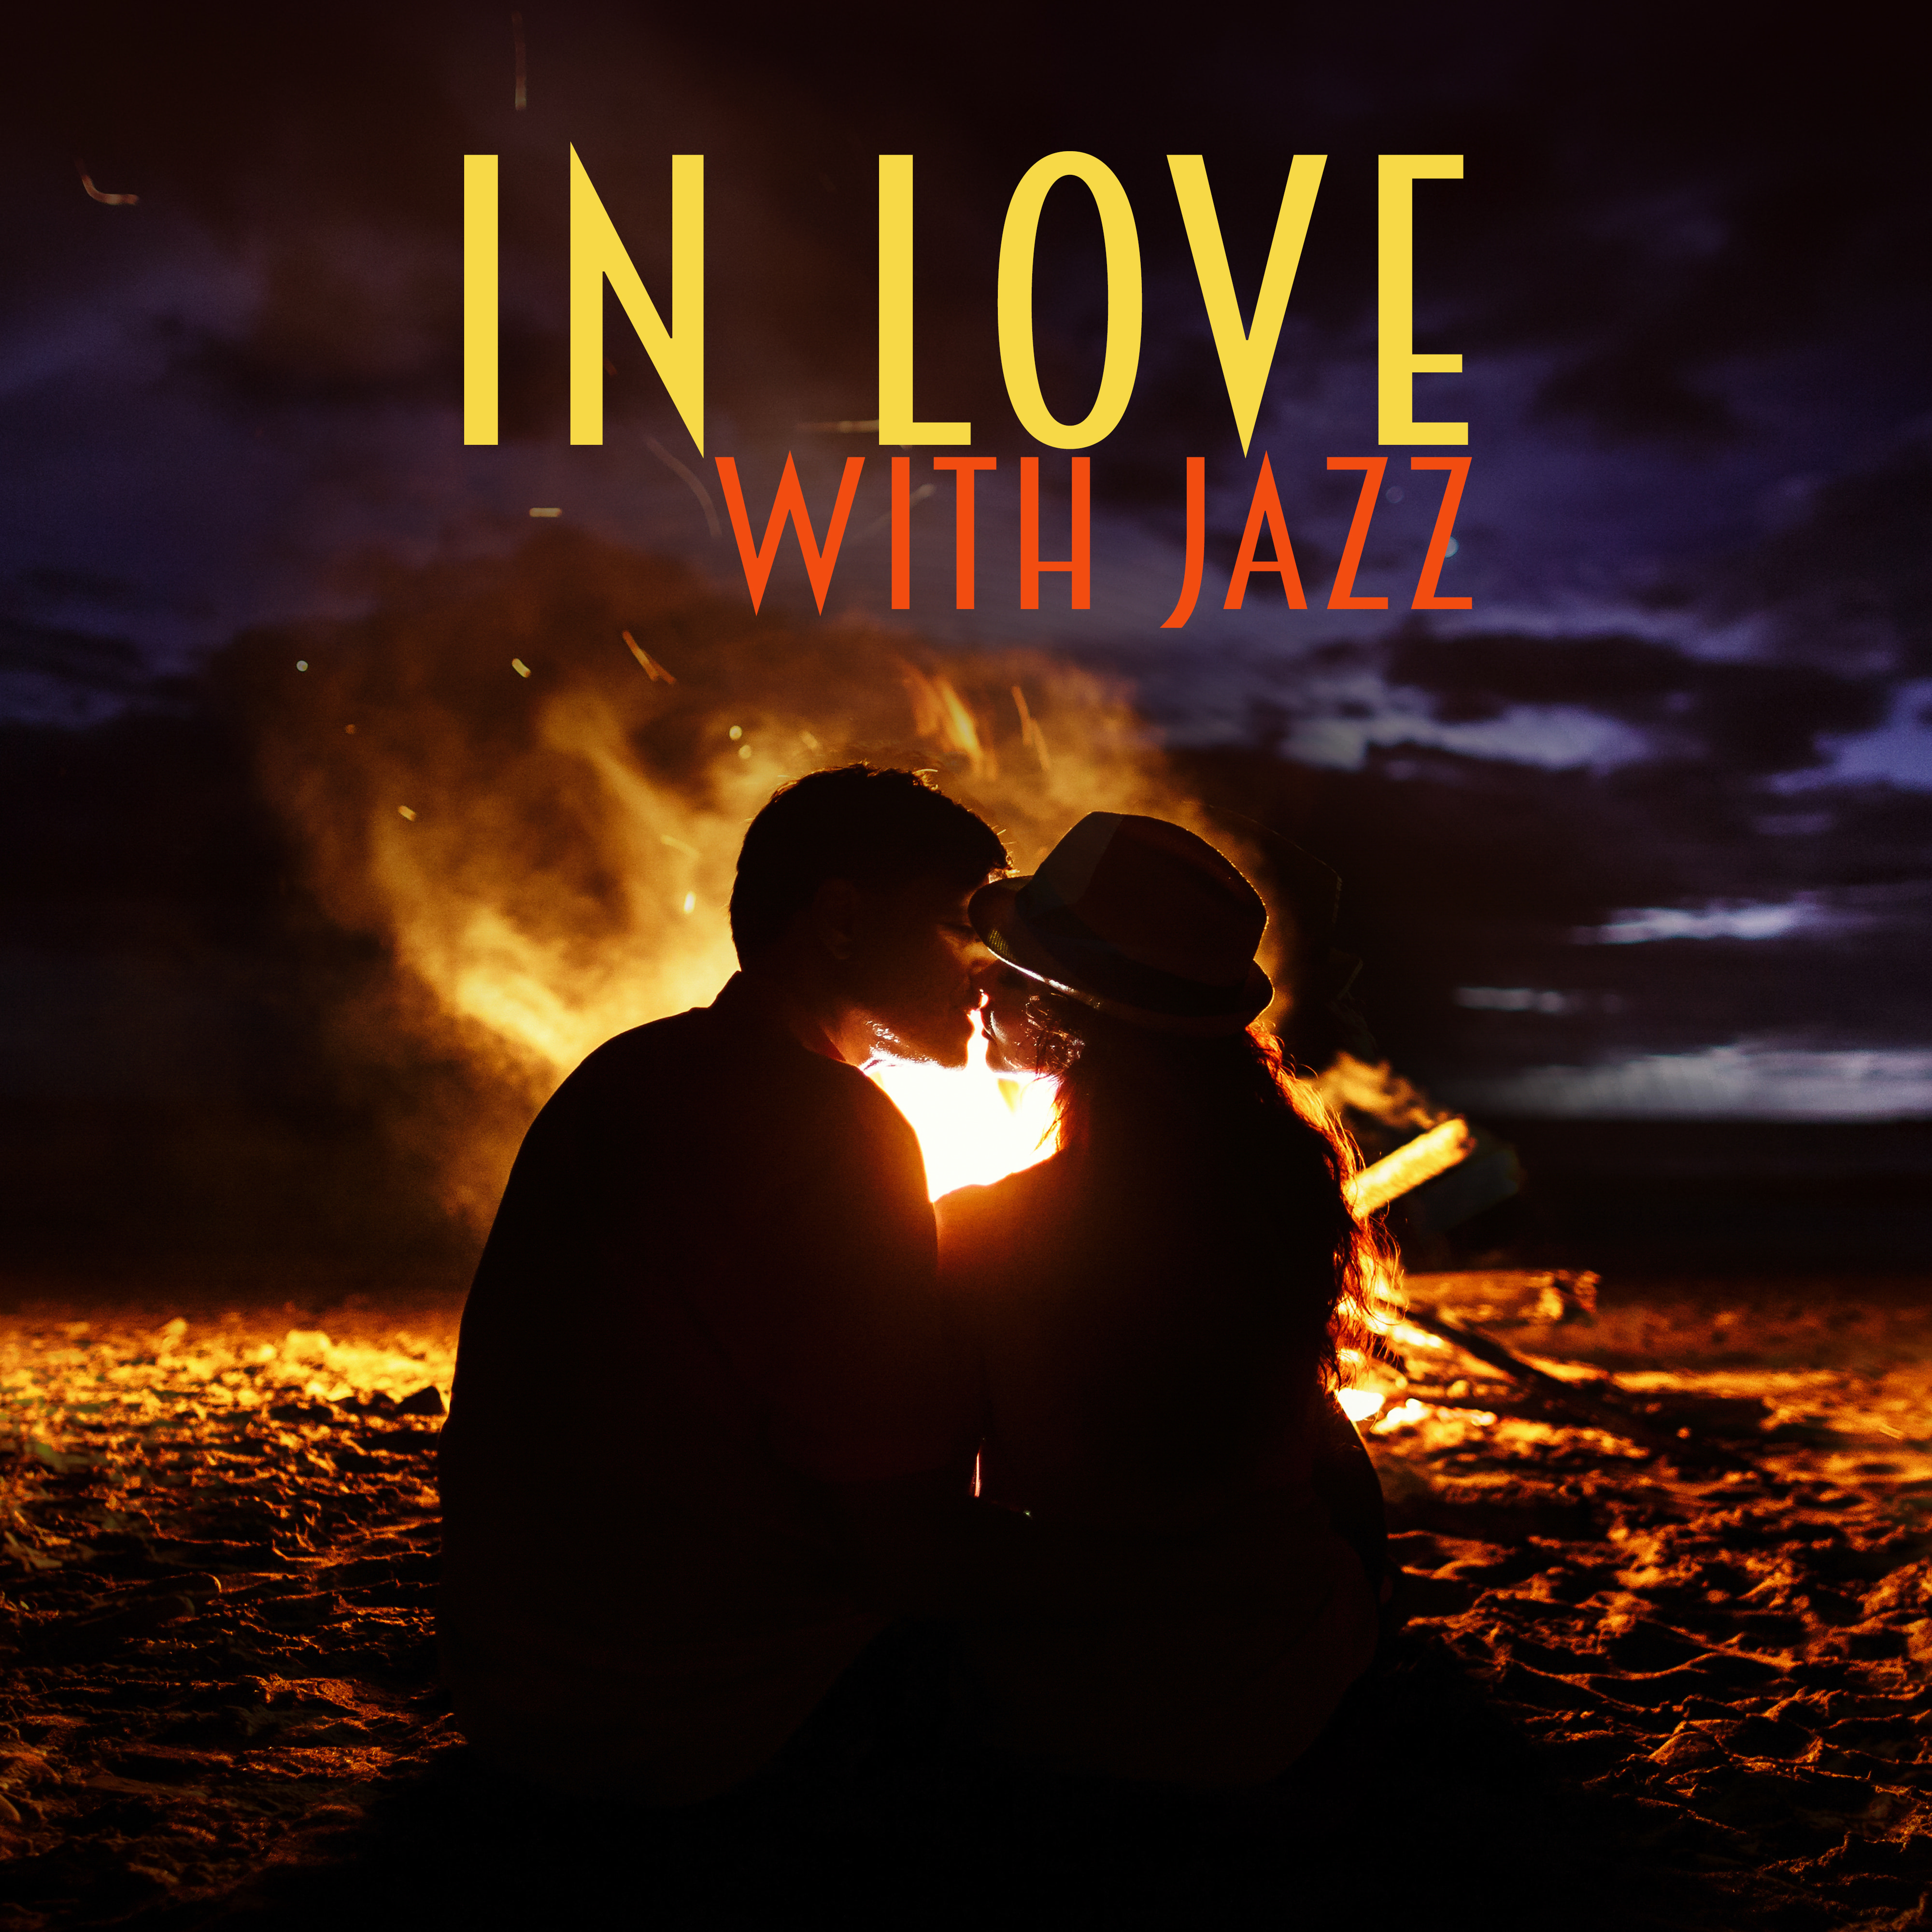 In Love with Jazz